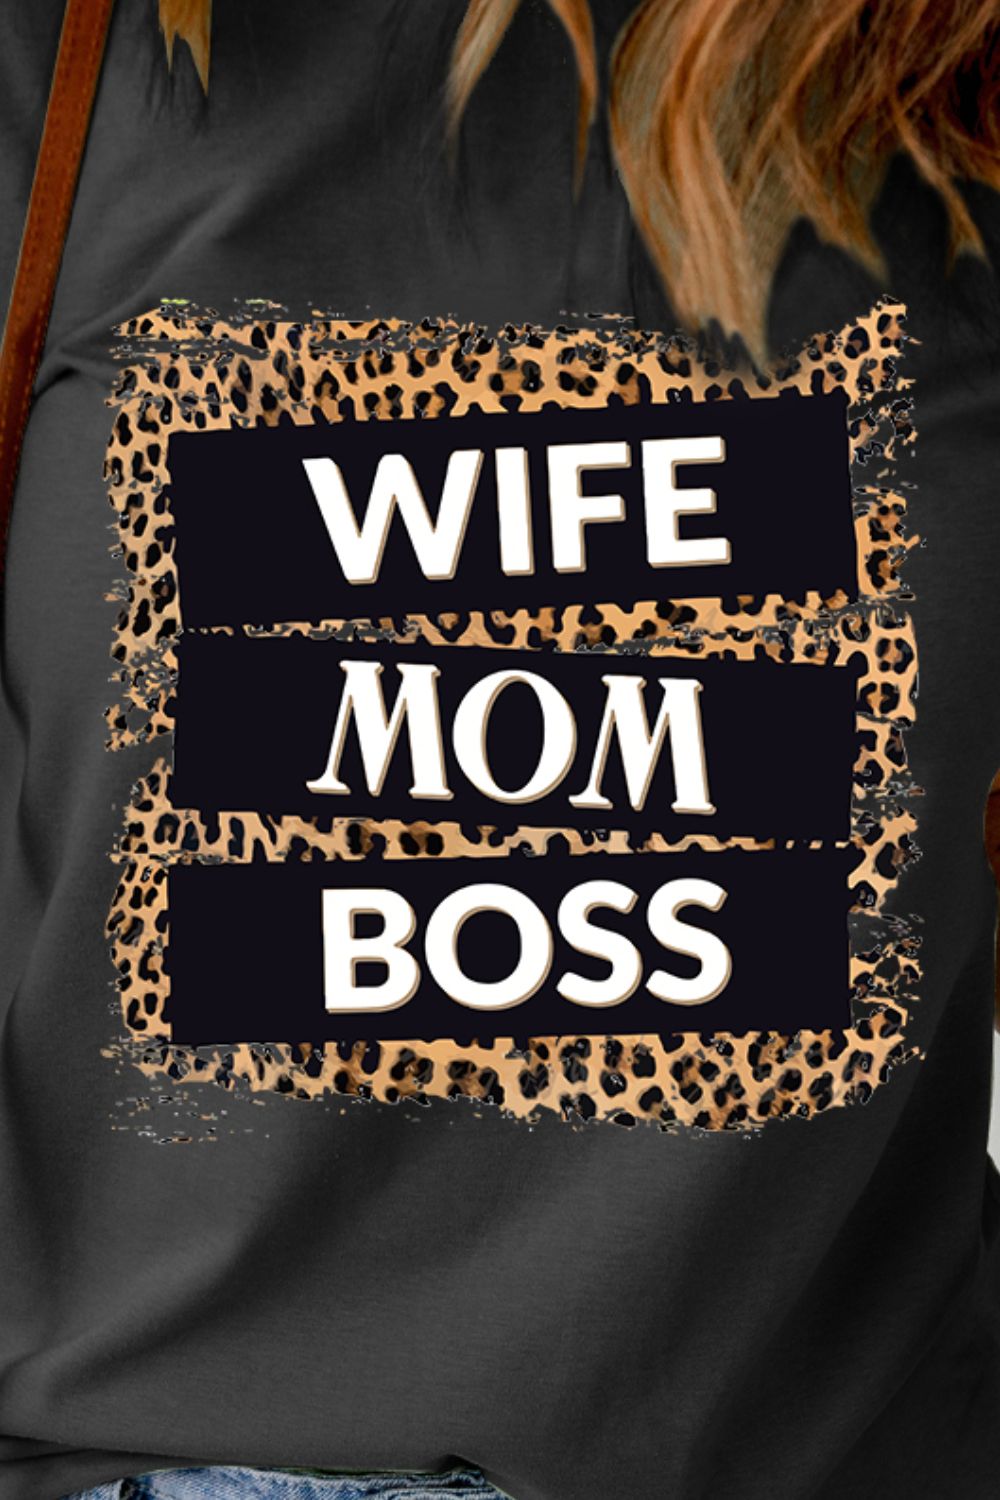 WIFE MOM BOSS Leopard Graphic Tee  Krazy Heart Designs Boutique   